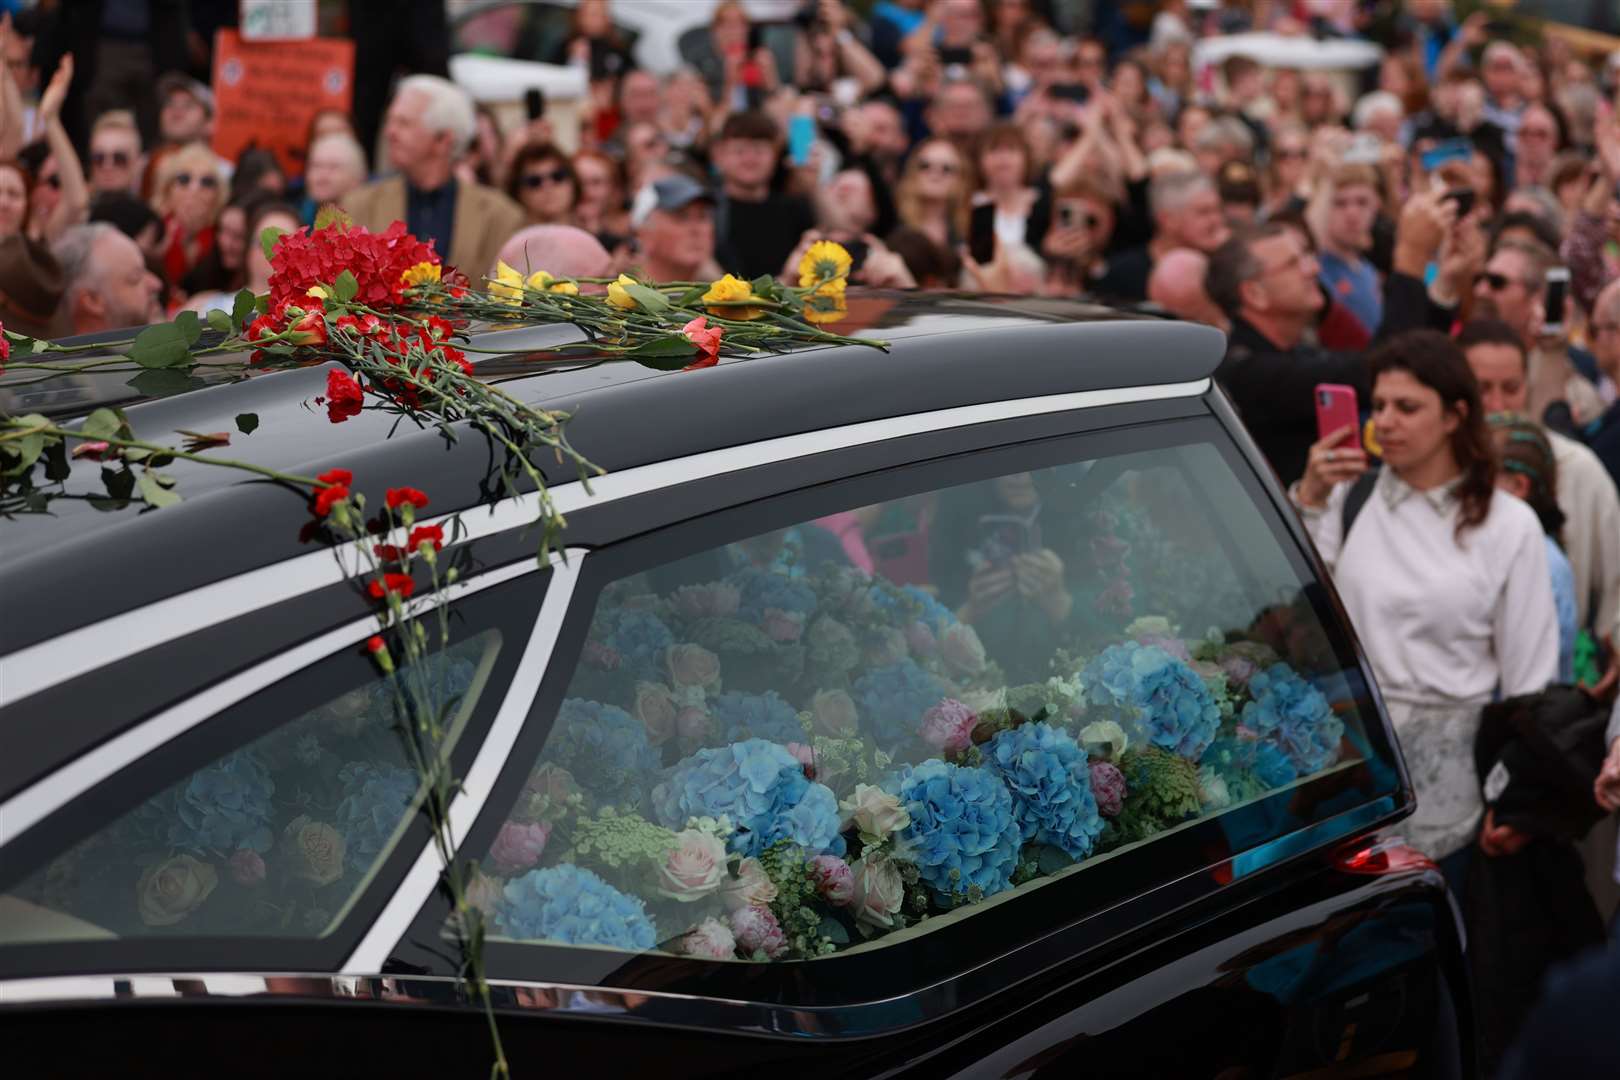 The Irish singer’s funeral cortege passes through her former home town of Bray, Co Wicklow, ahead of a private burial service (Liam McBurney/PA)